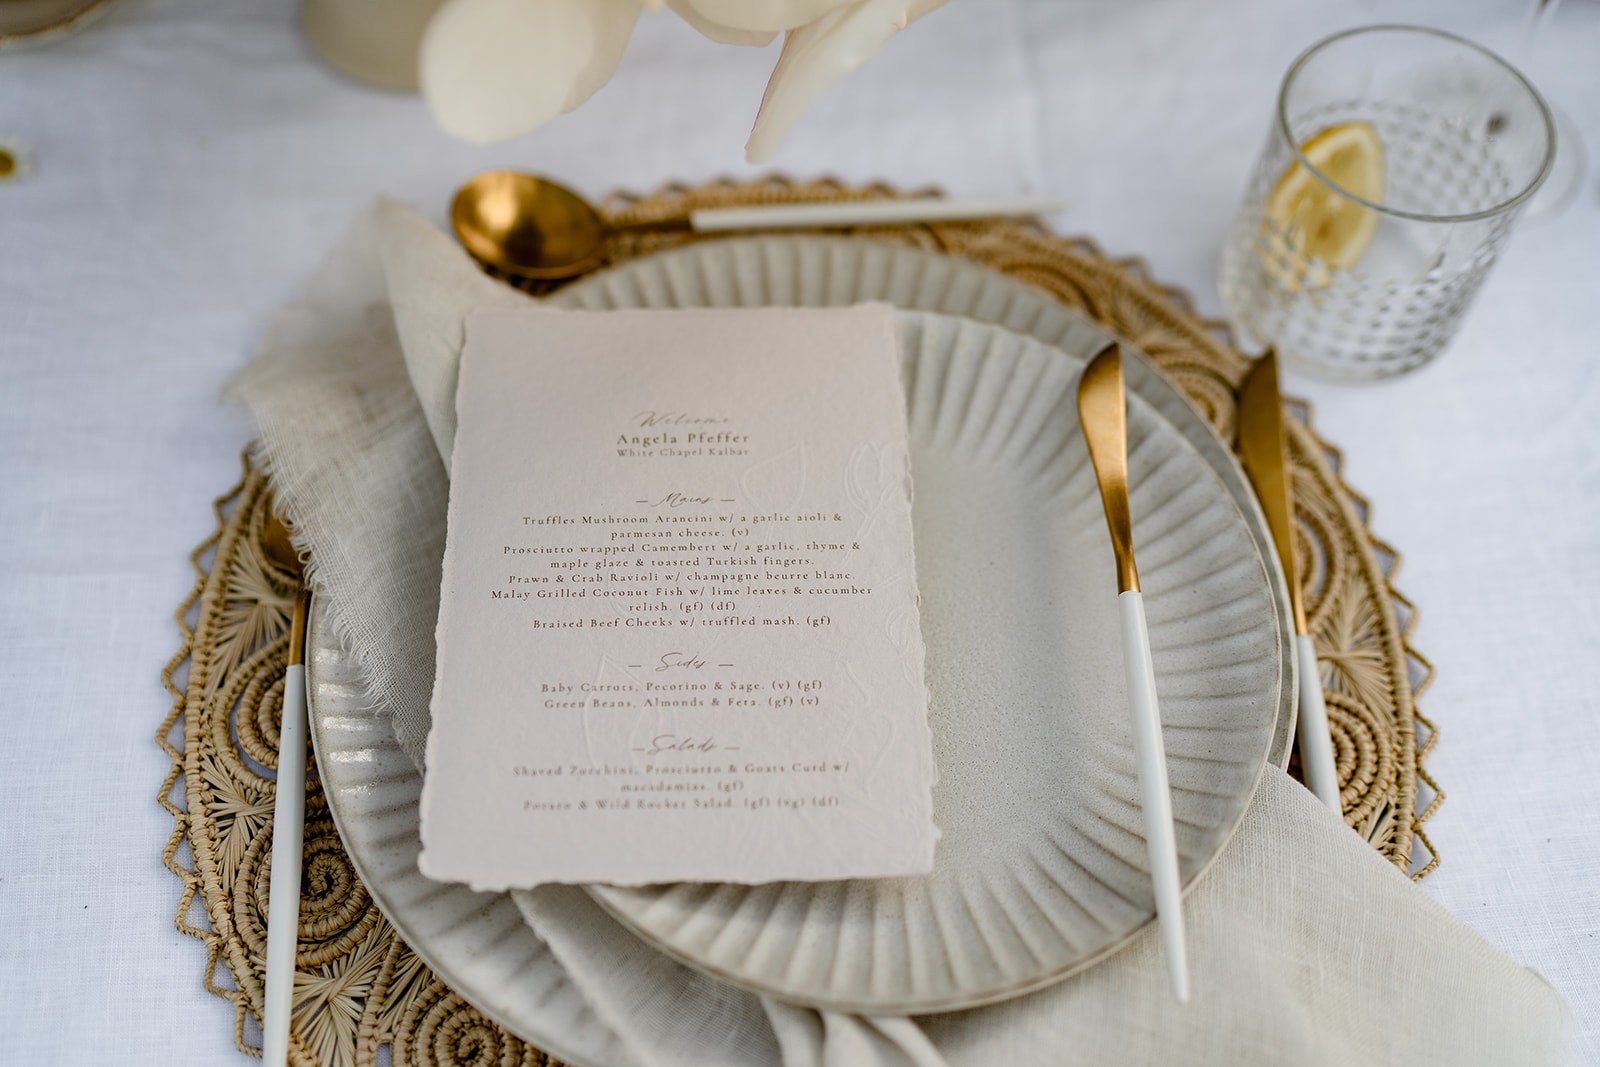 Handmade paper menus adding the finishing touch designed by Danielle Maree Jones from Lily Maree Designs.